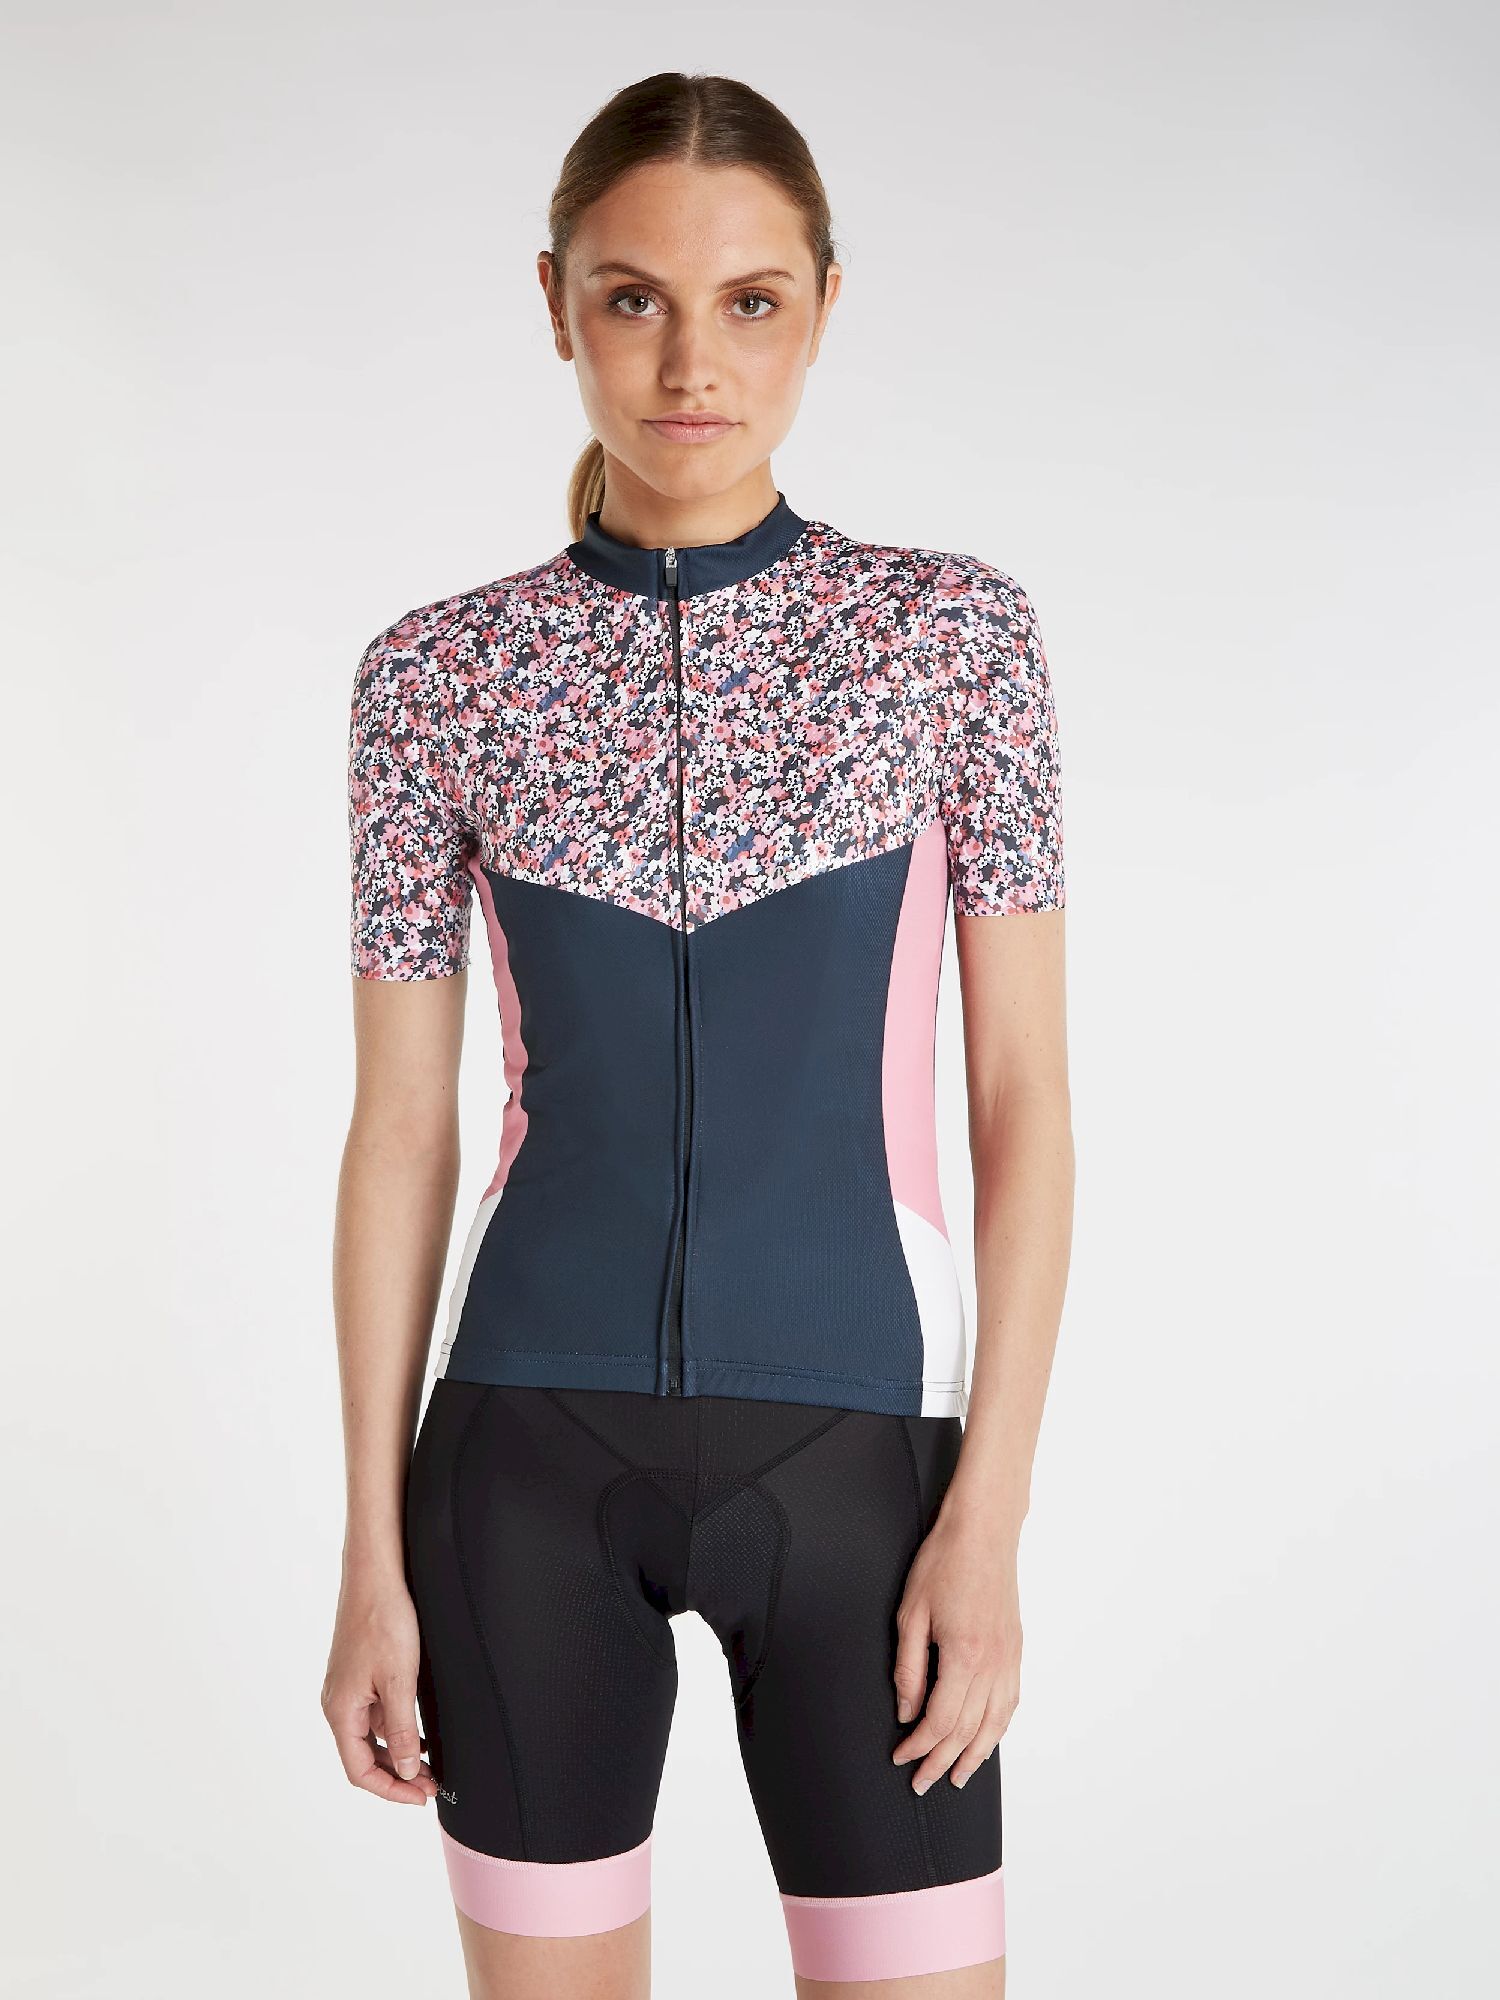 Protest Prtcacao - Maillot vélo femme | Hardloop